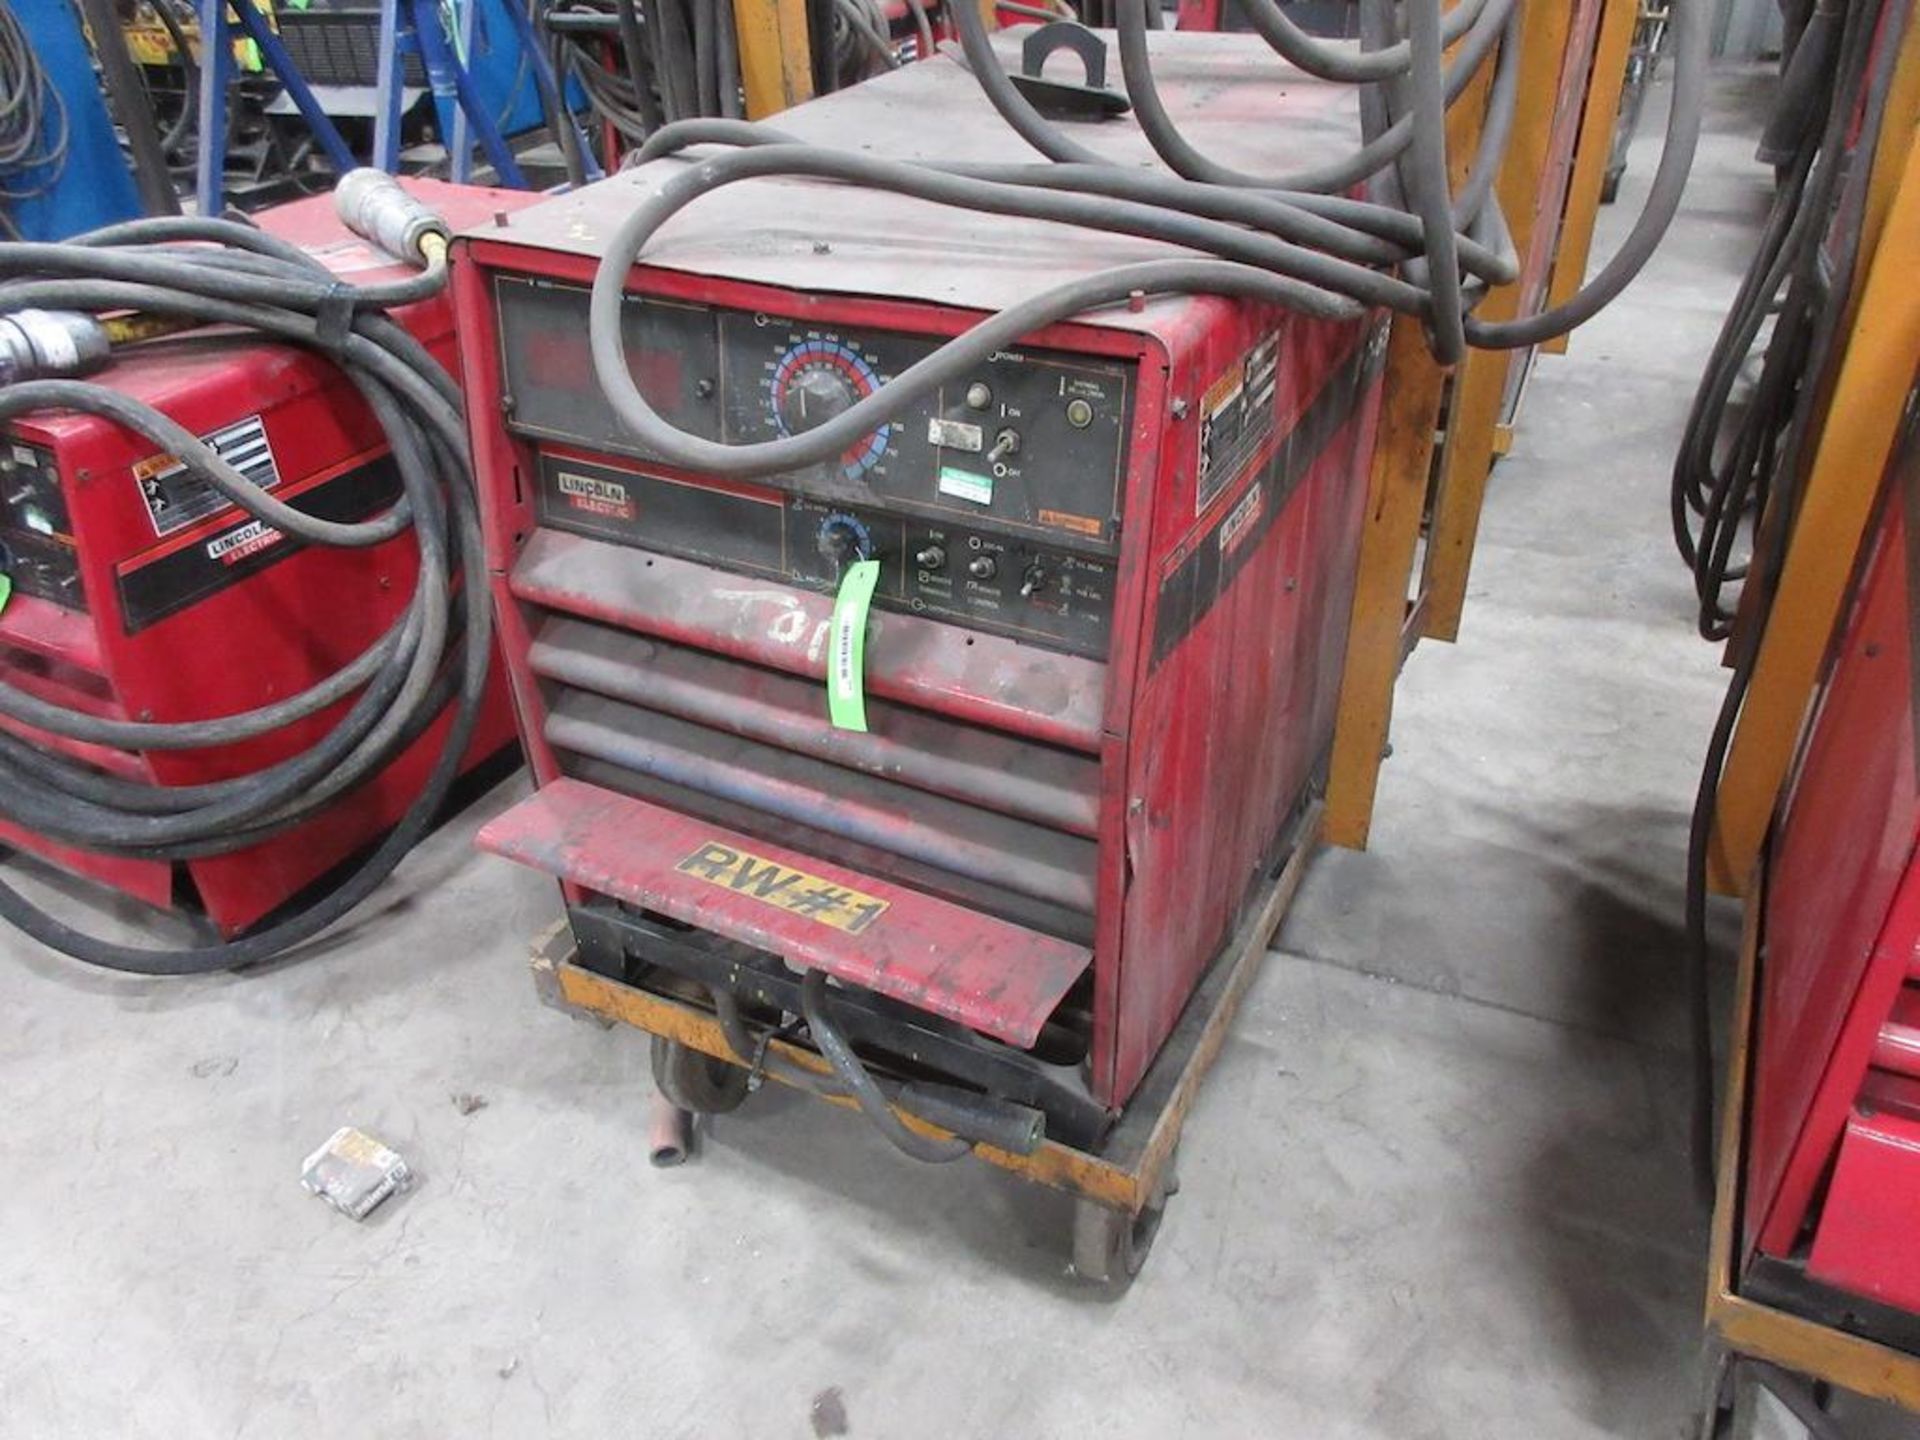 LINCOLN ELECTRIC DC 655 WELDING MACHINE W PORTABLE CART